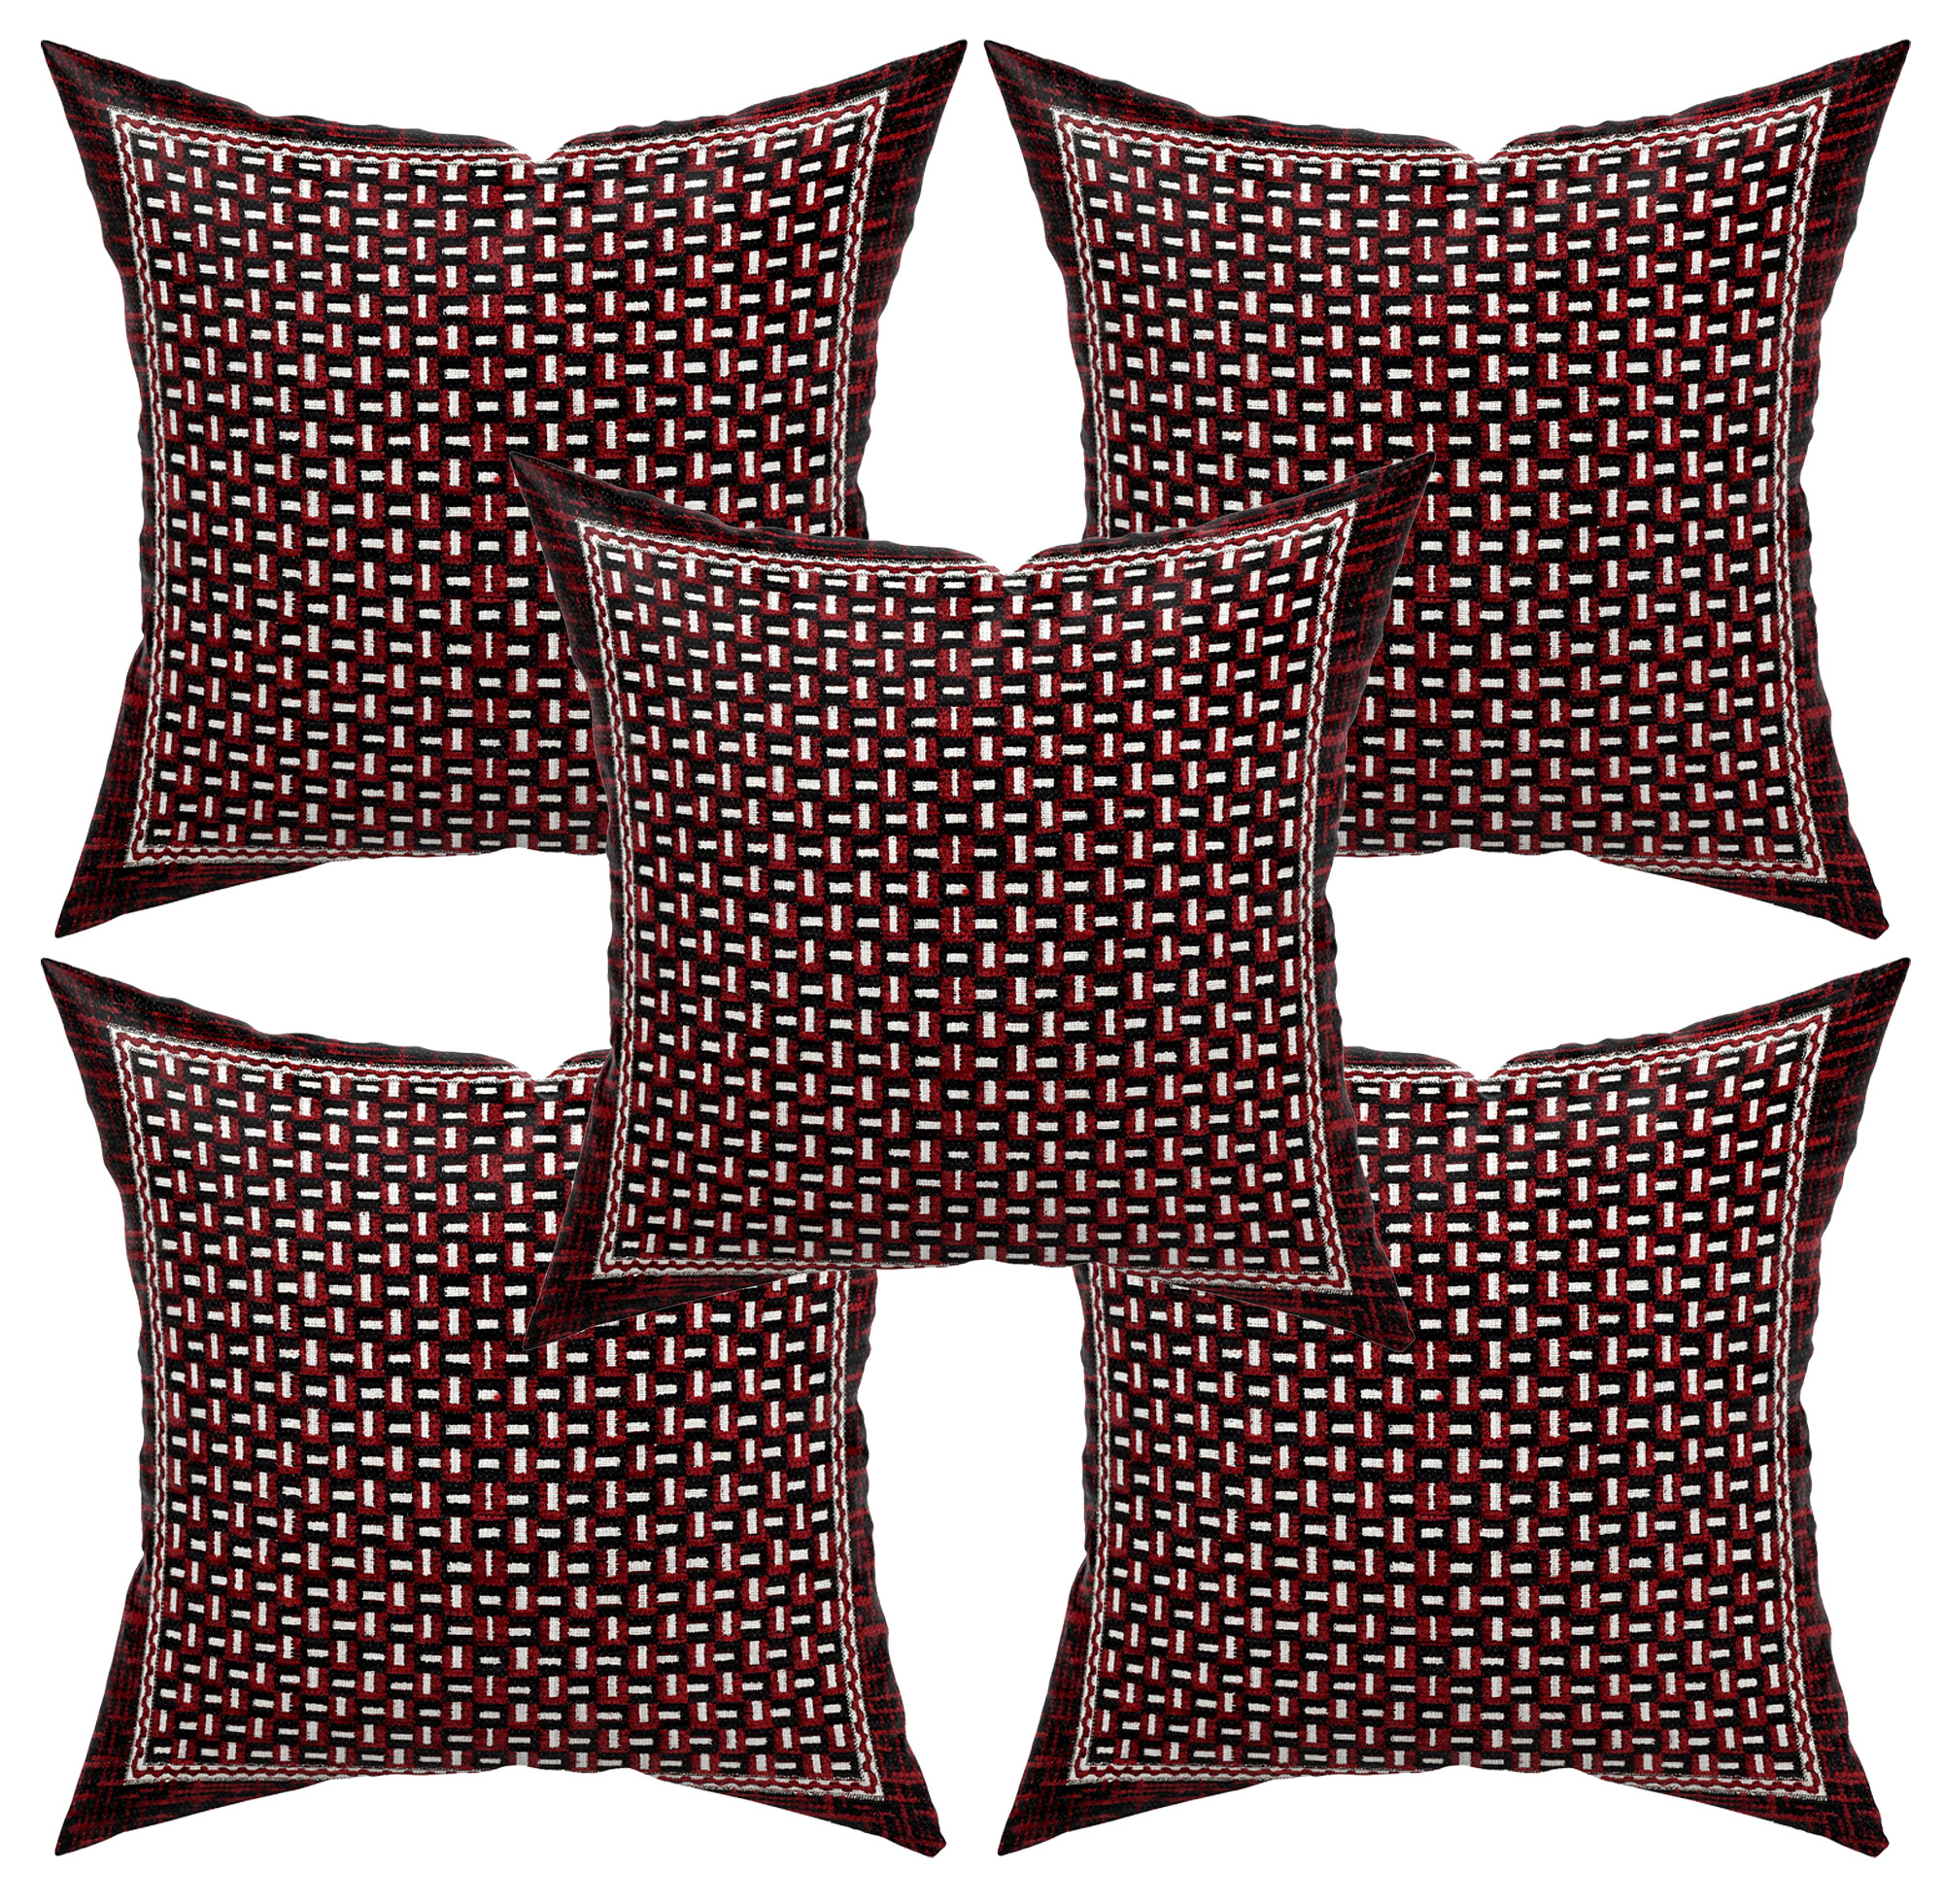 Kuber Industries Velvet Check Design Soft Decorative Square Throw Pillow Cover, Cushion Covers, Pillow Case For Sofa Couch Bed Chair 16x16 Inch-(Maroon)